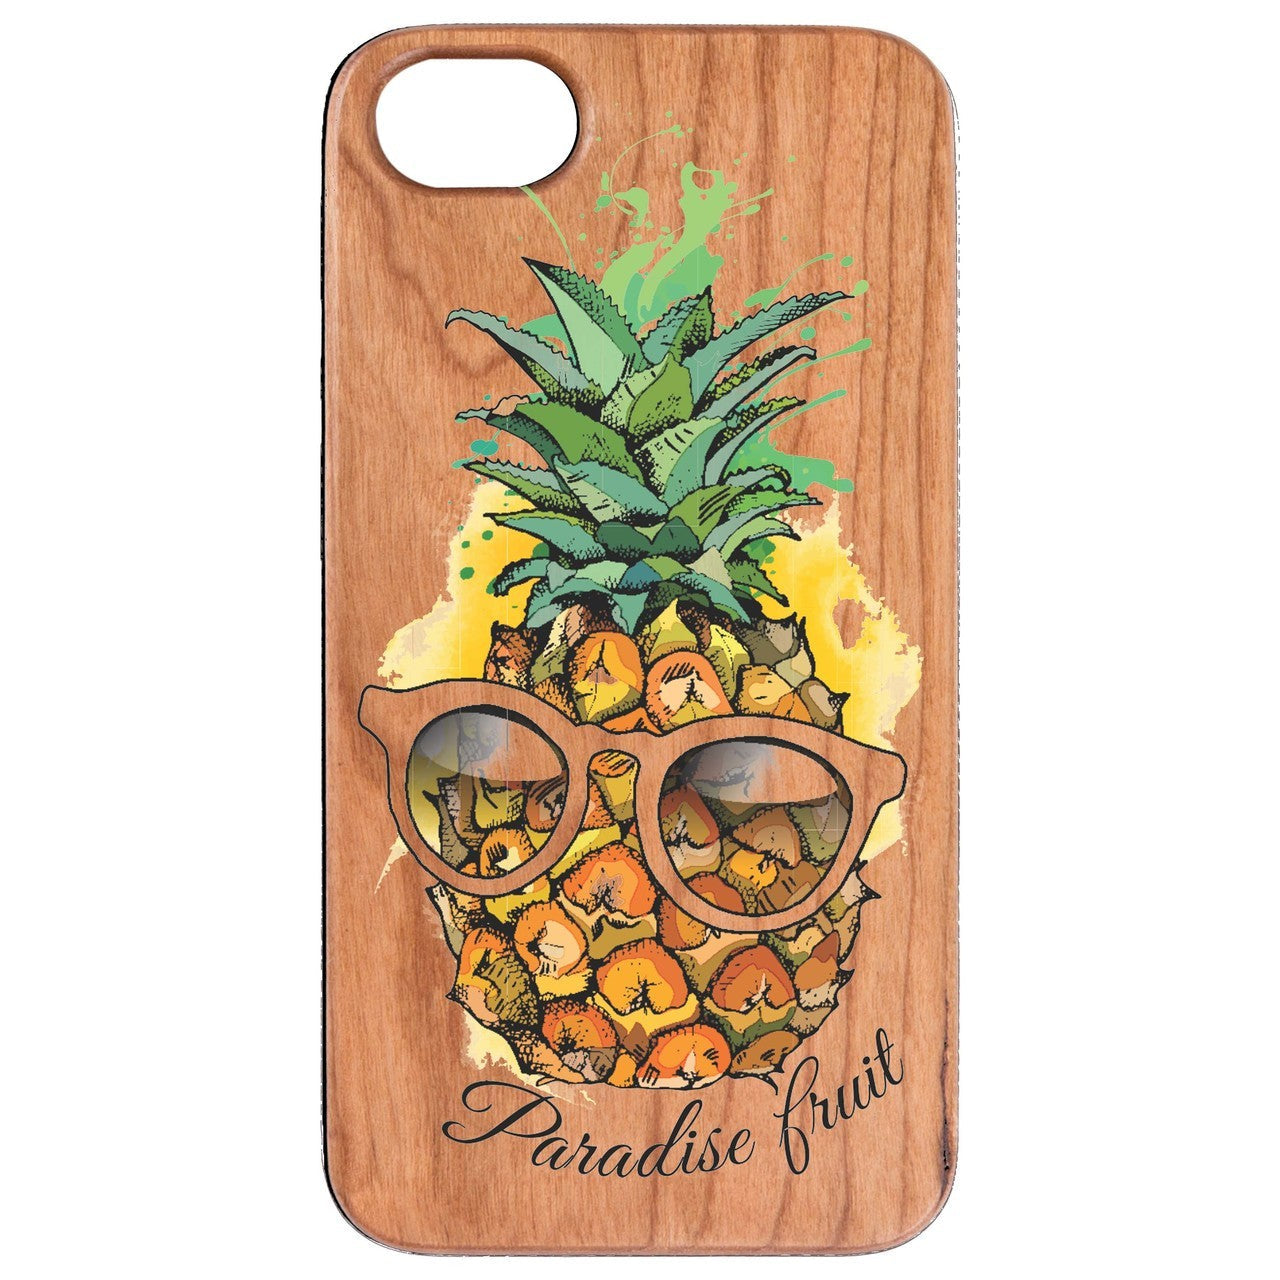  Paradise Fruit - UV Color Printed - Wooden Phone Case - IPhone 13 Models